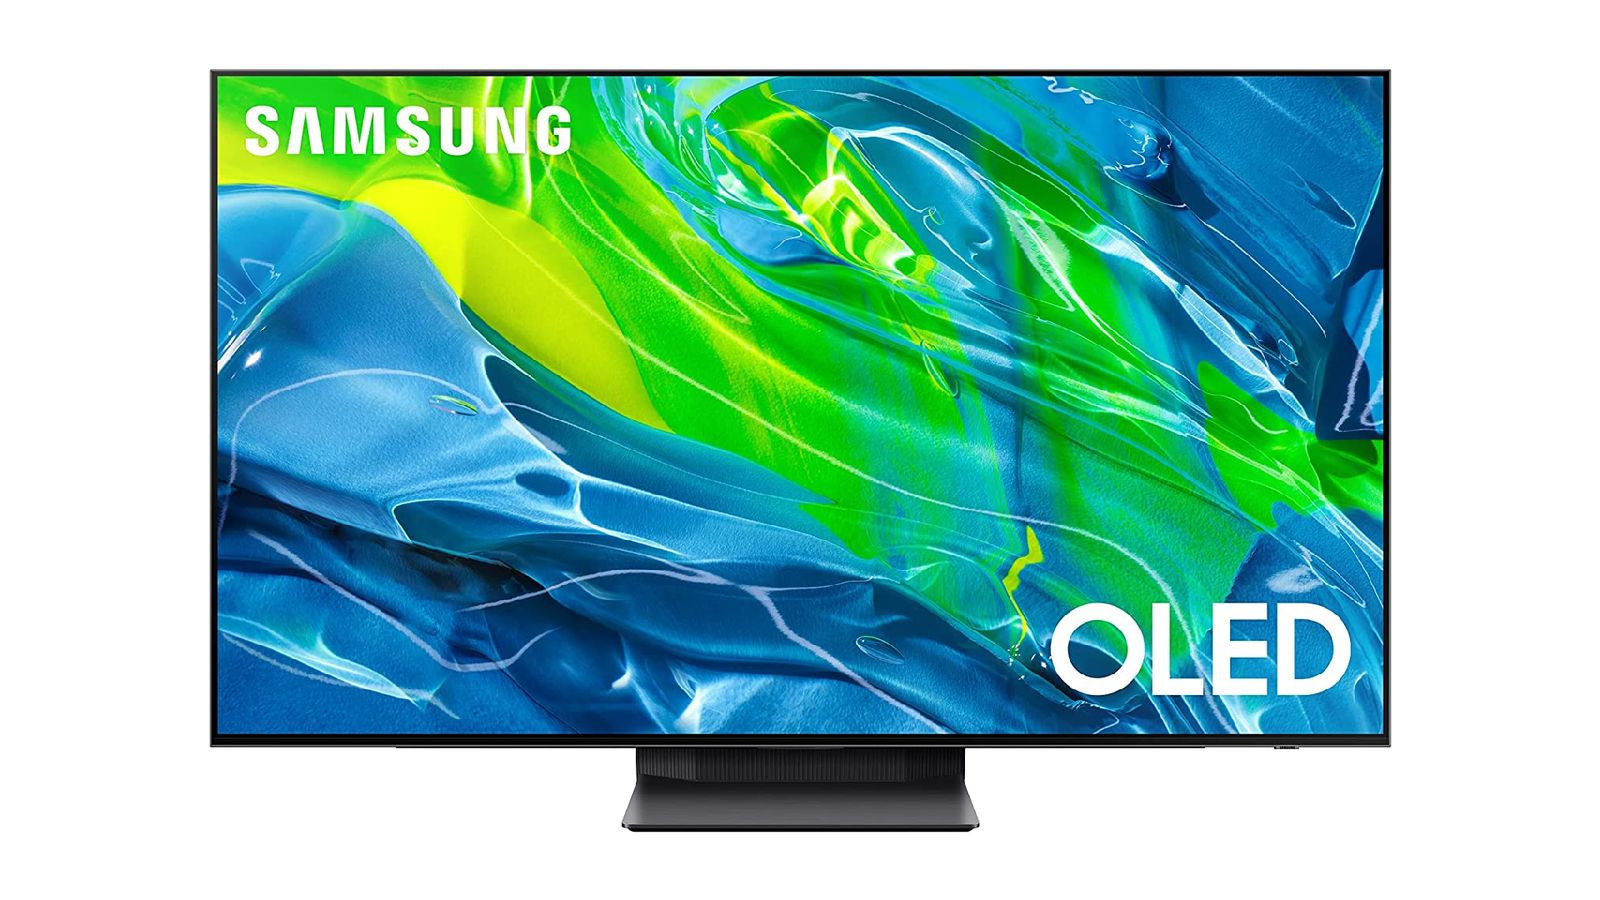 Samsung S95B dark grey-framed TV with a green and blue pattern on the display.